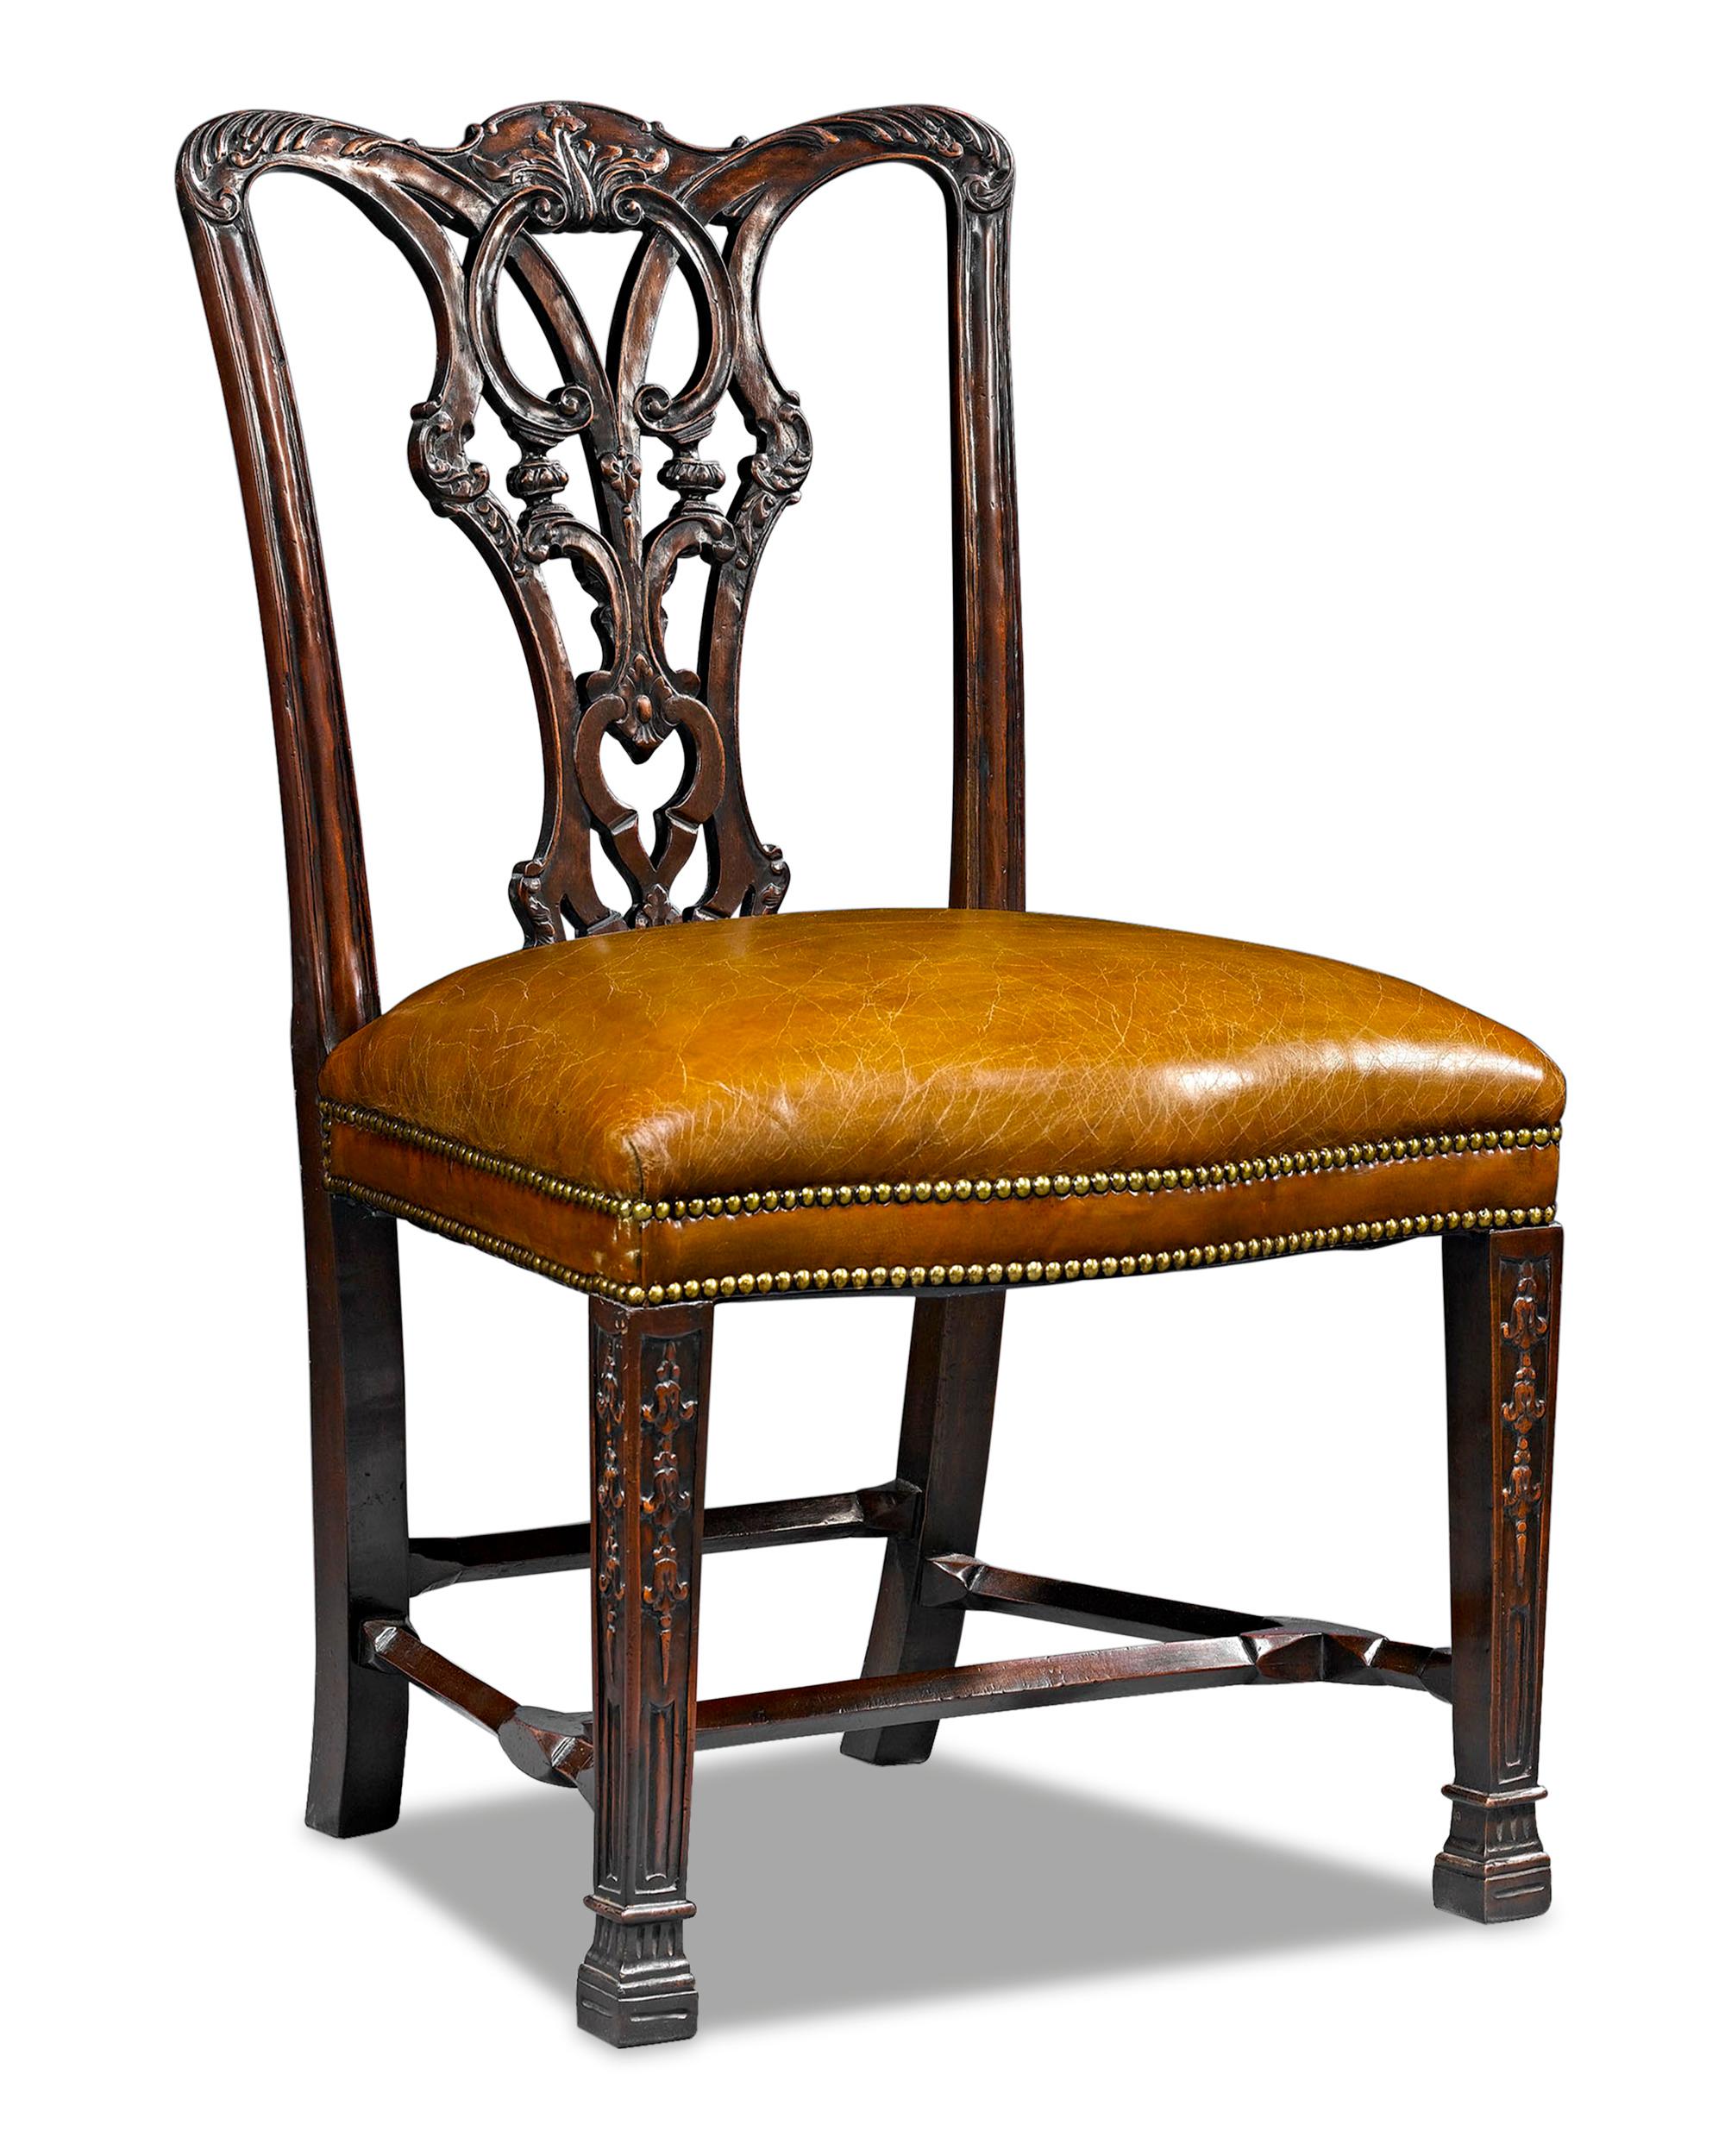 An outstanding set of Chippendale-style dining chairs, created from designs by Thomas Chippendale, one of history's most celebrated artisans. A testimony to the incredible workmanship inspired by Chippendale's example, these chairs not only display